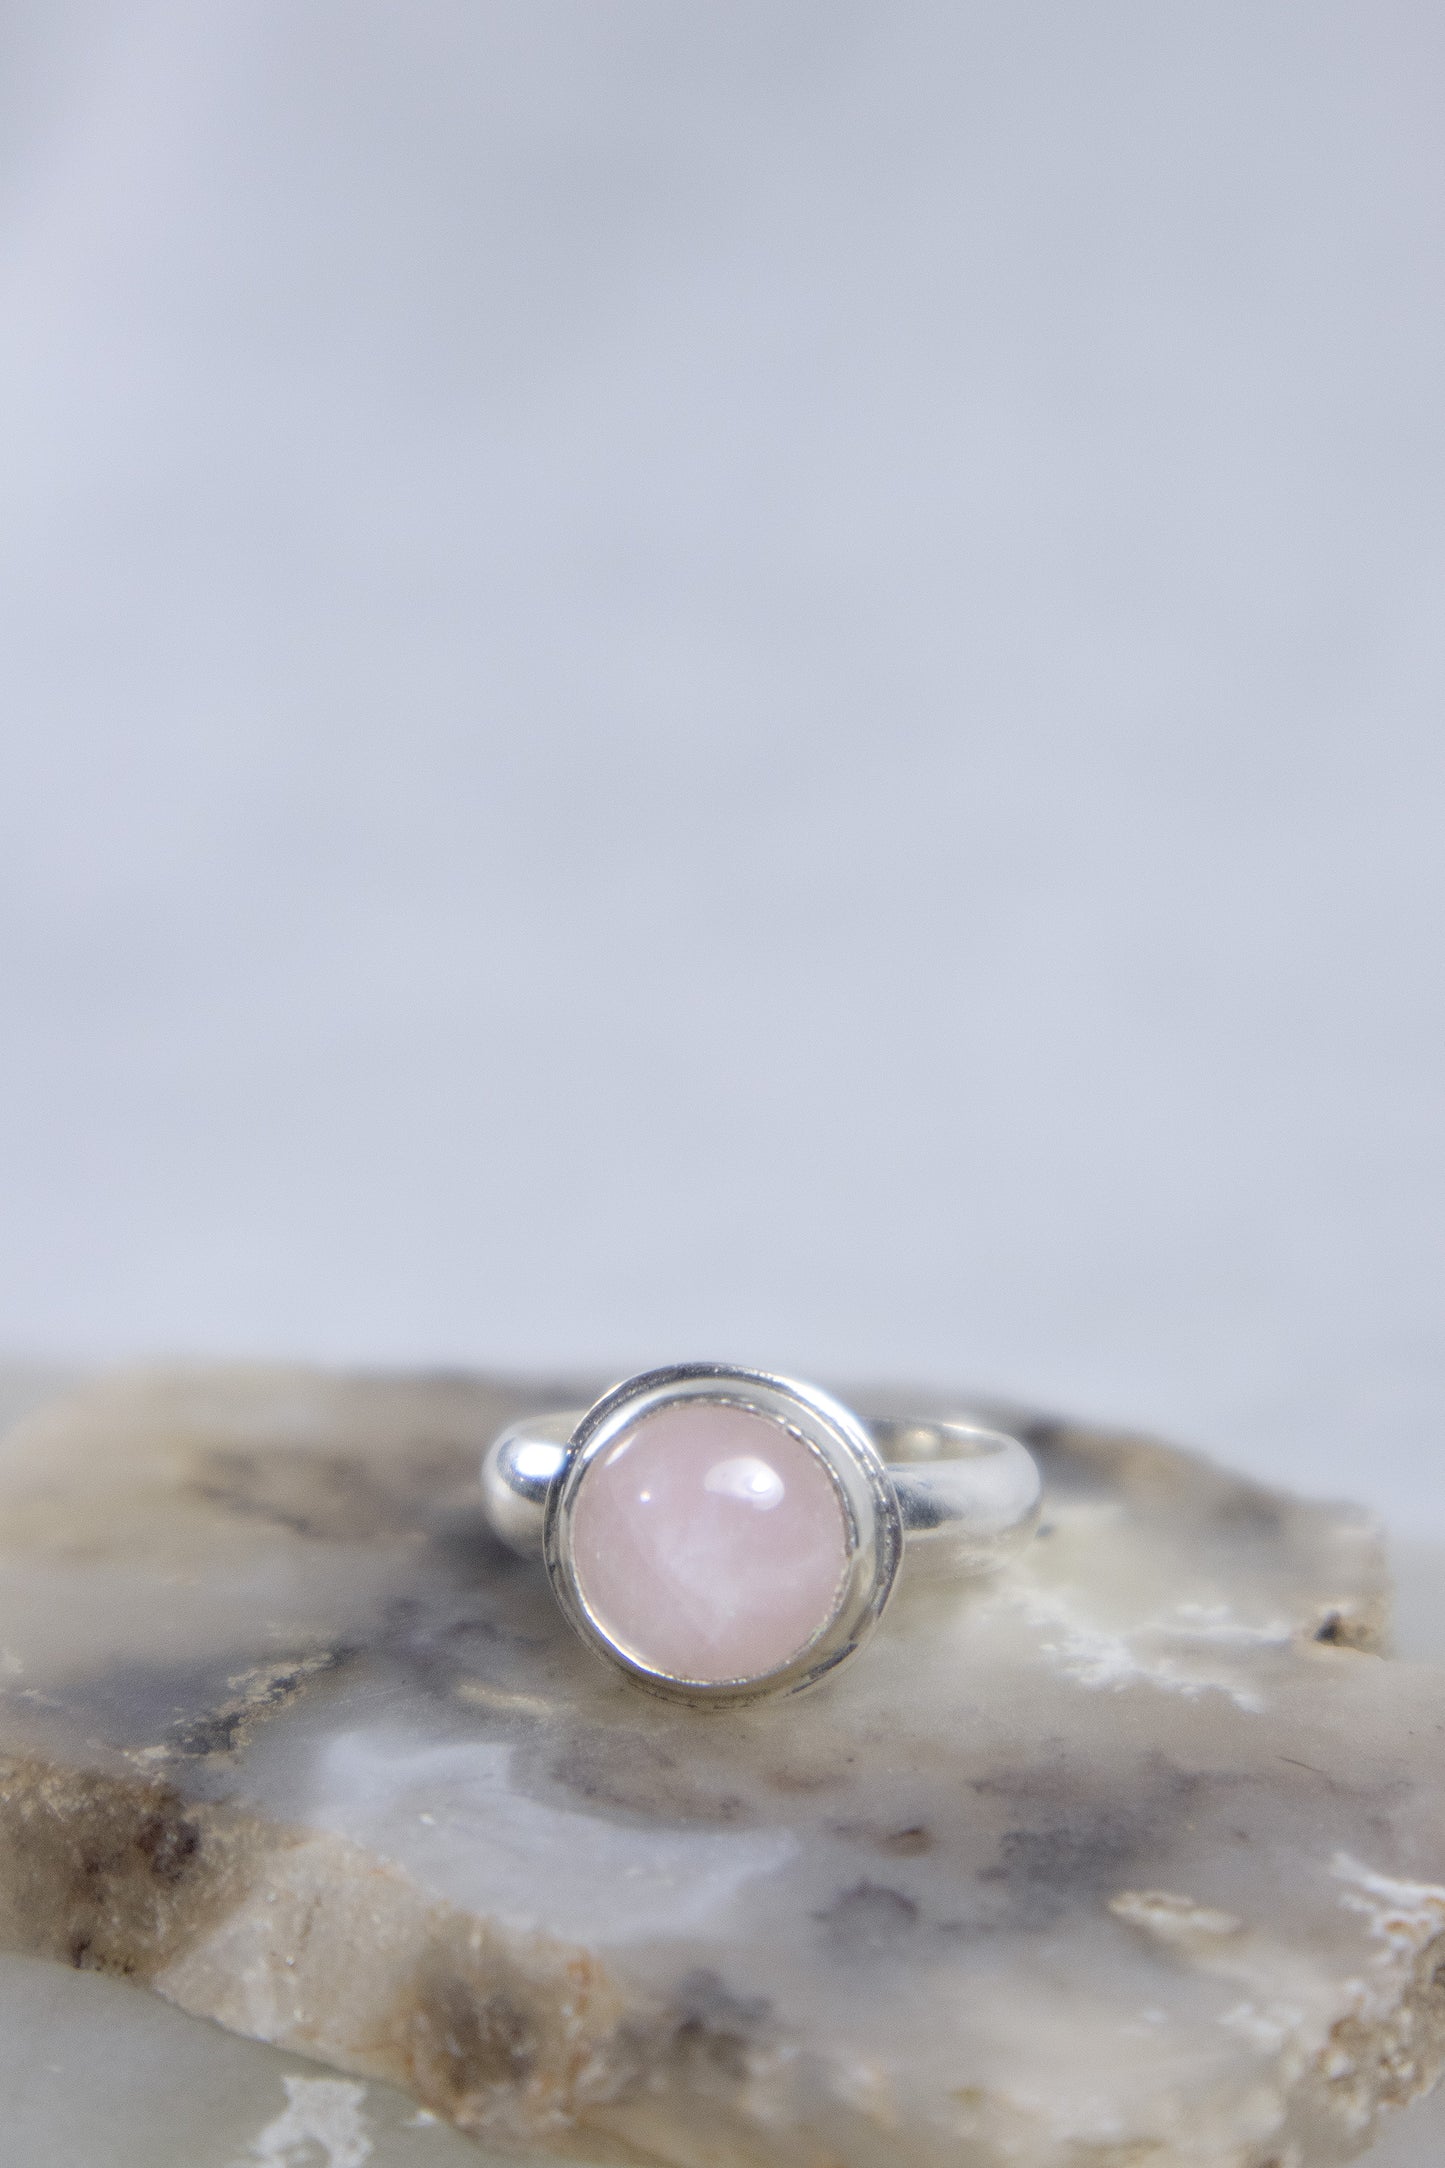 Rose Quartz Ring in Sterling Silver Size US 6.5